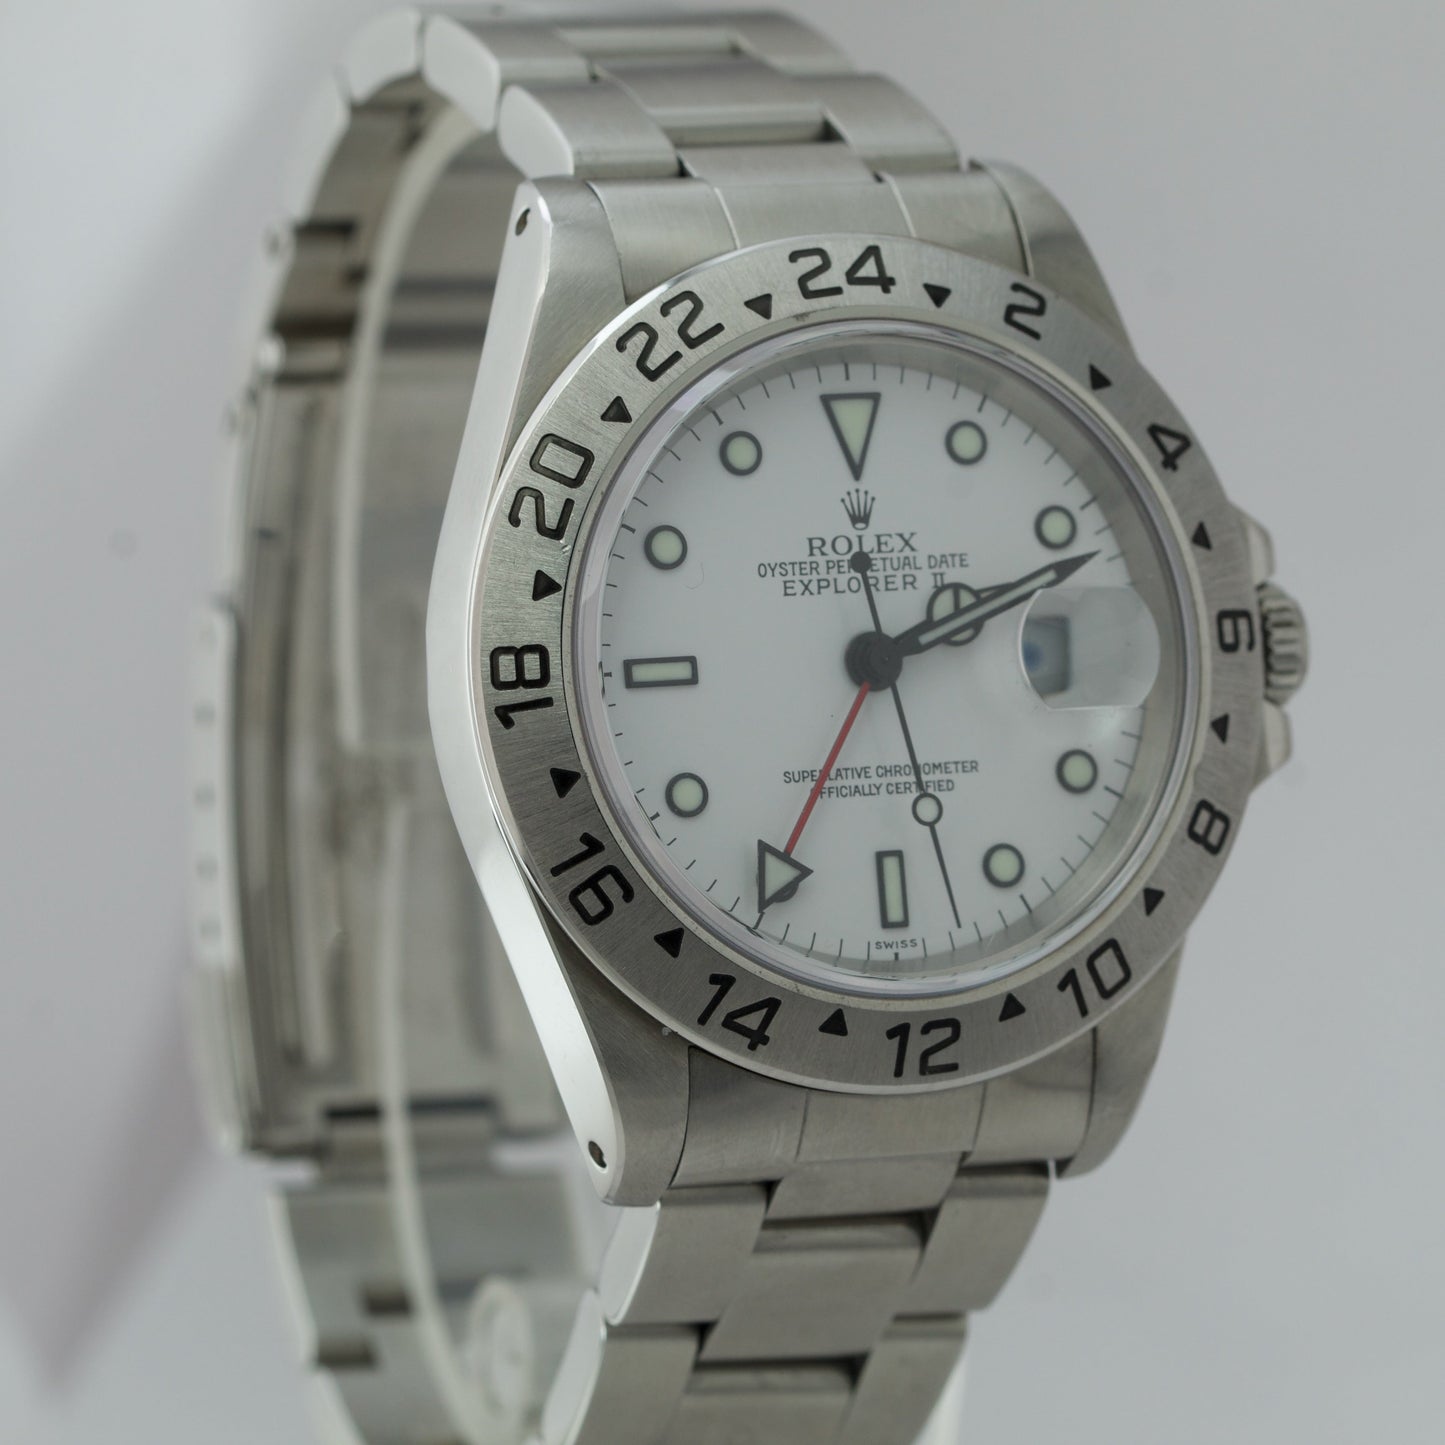 Rolex Explorer II Polar White SWISS ONLY A SERIAL GMT 40mm Stainless Watch 16570